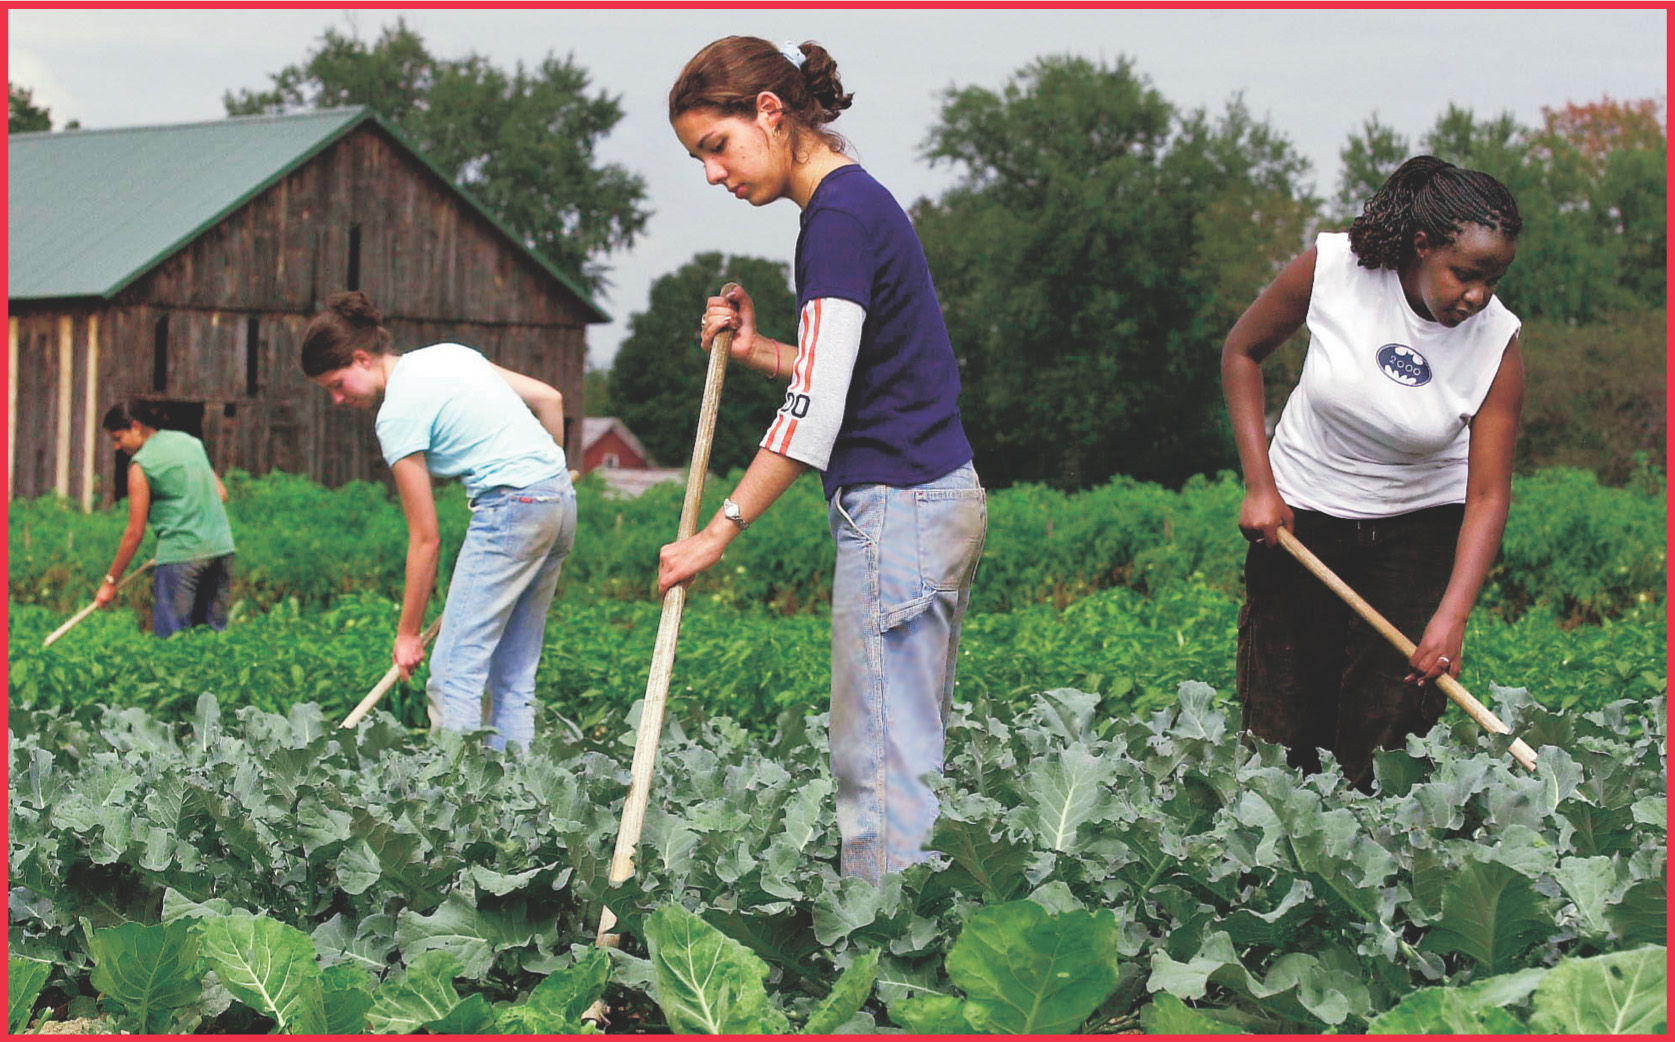 photo: students tend to crops in a field.